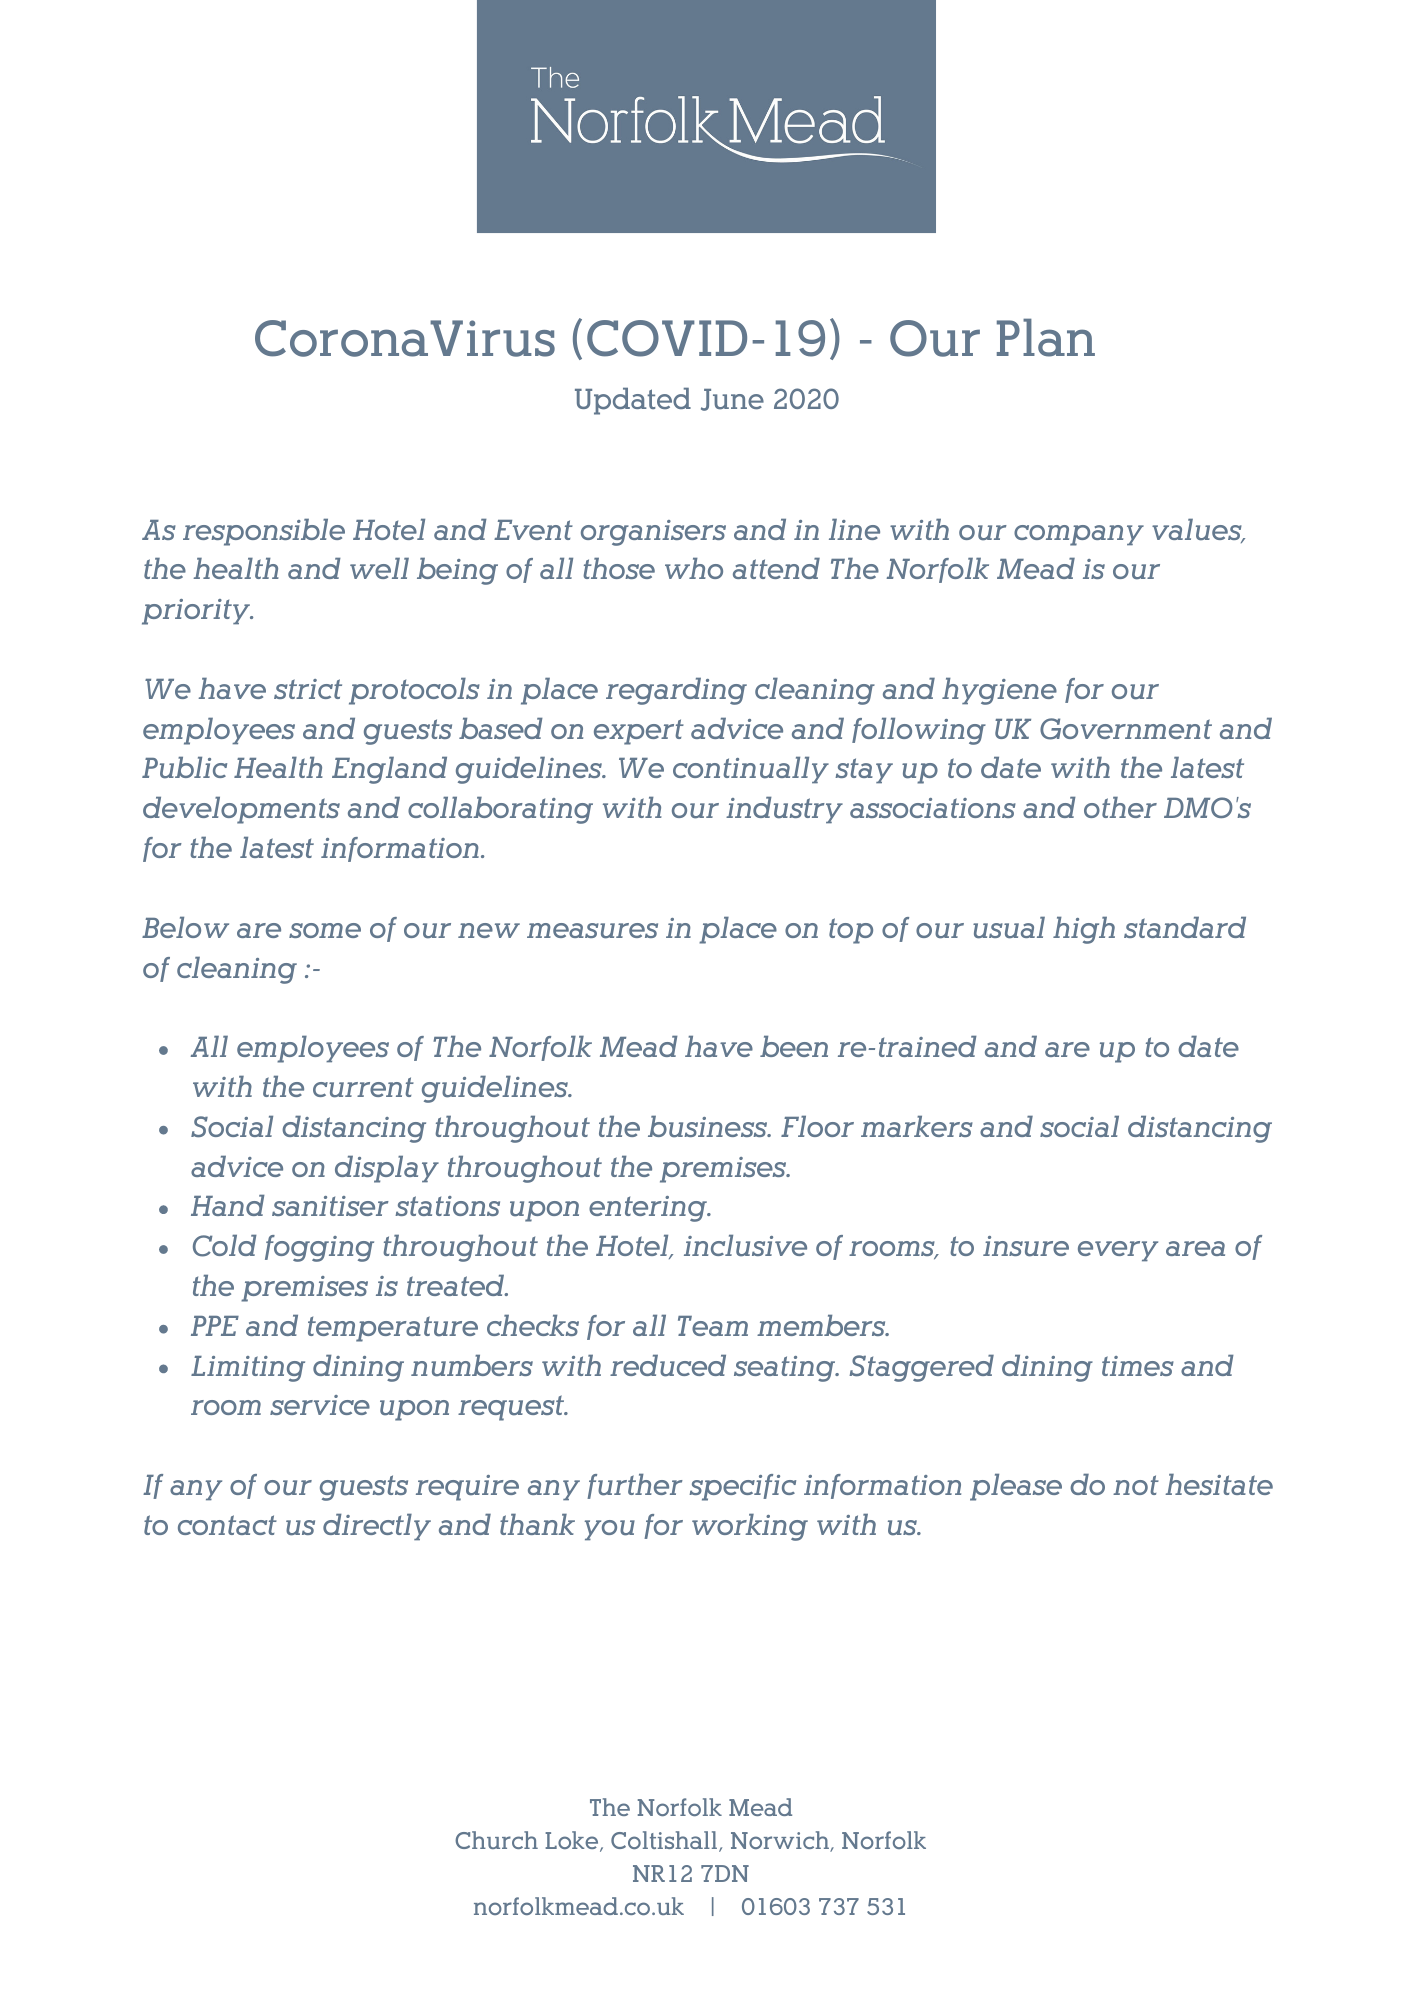 The Norfolk Mead Covid-19 plan